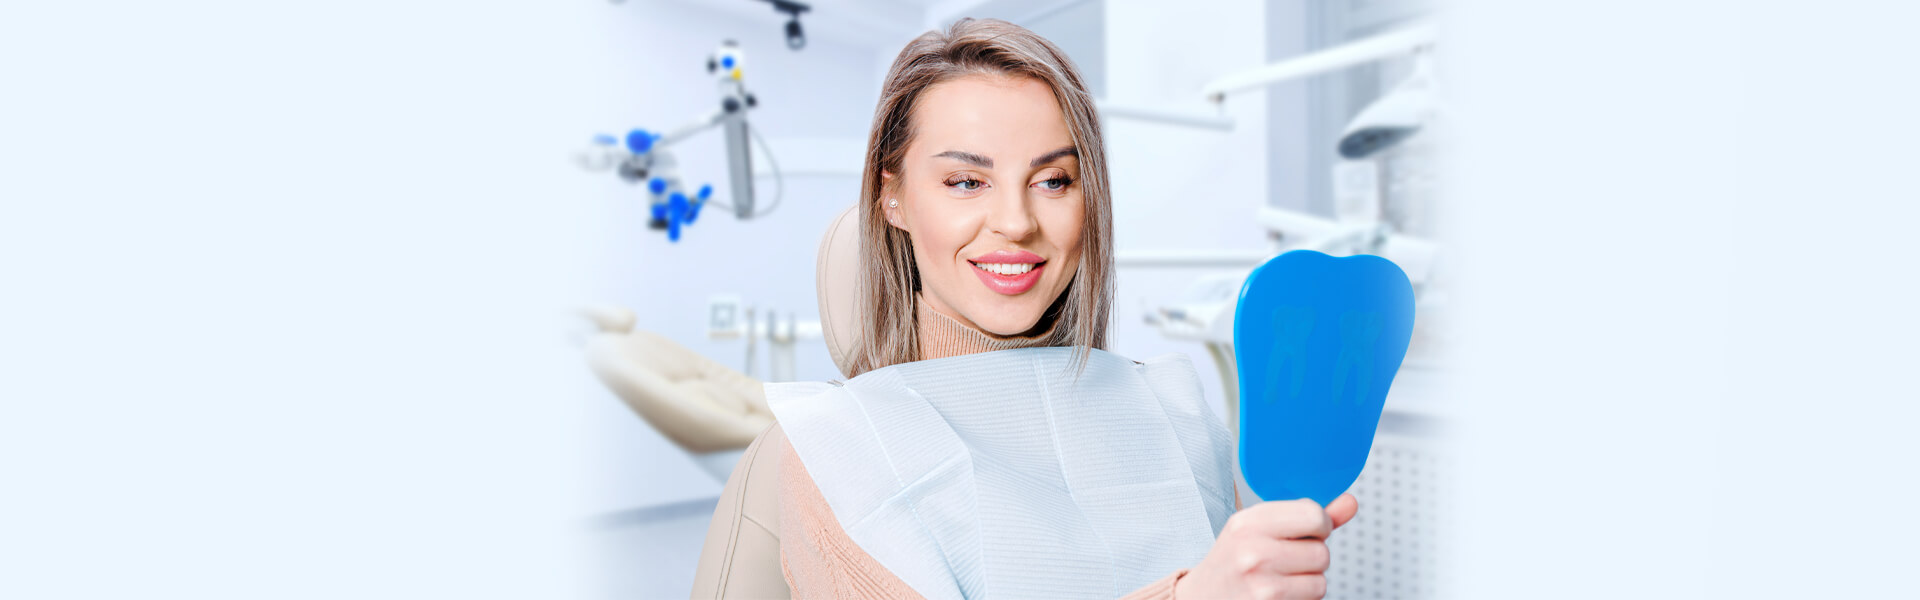 Do You Think Dental Exams and Cleanings Are a Nuisance and Are Better Ignored?